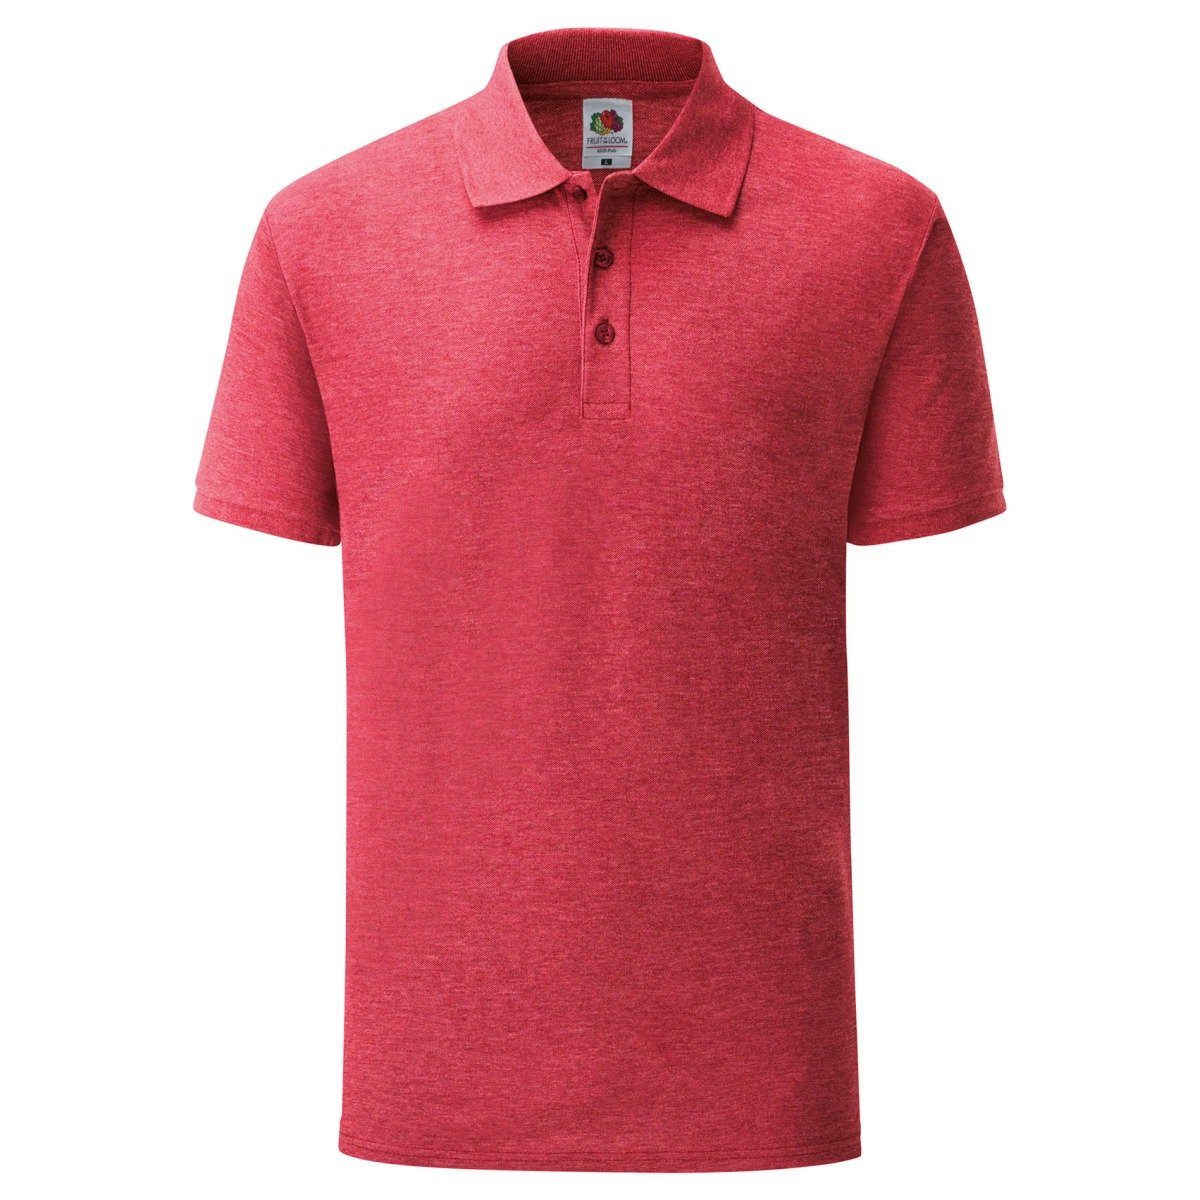 Fruit of the Loom Poloshirt Fruit of the Loom 65/35 Polo vintage rot meliert